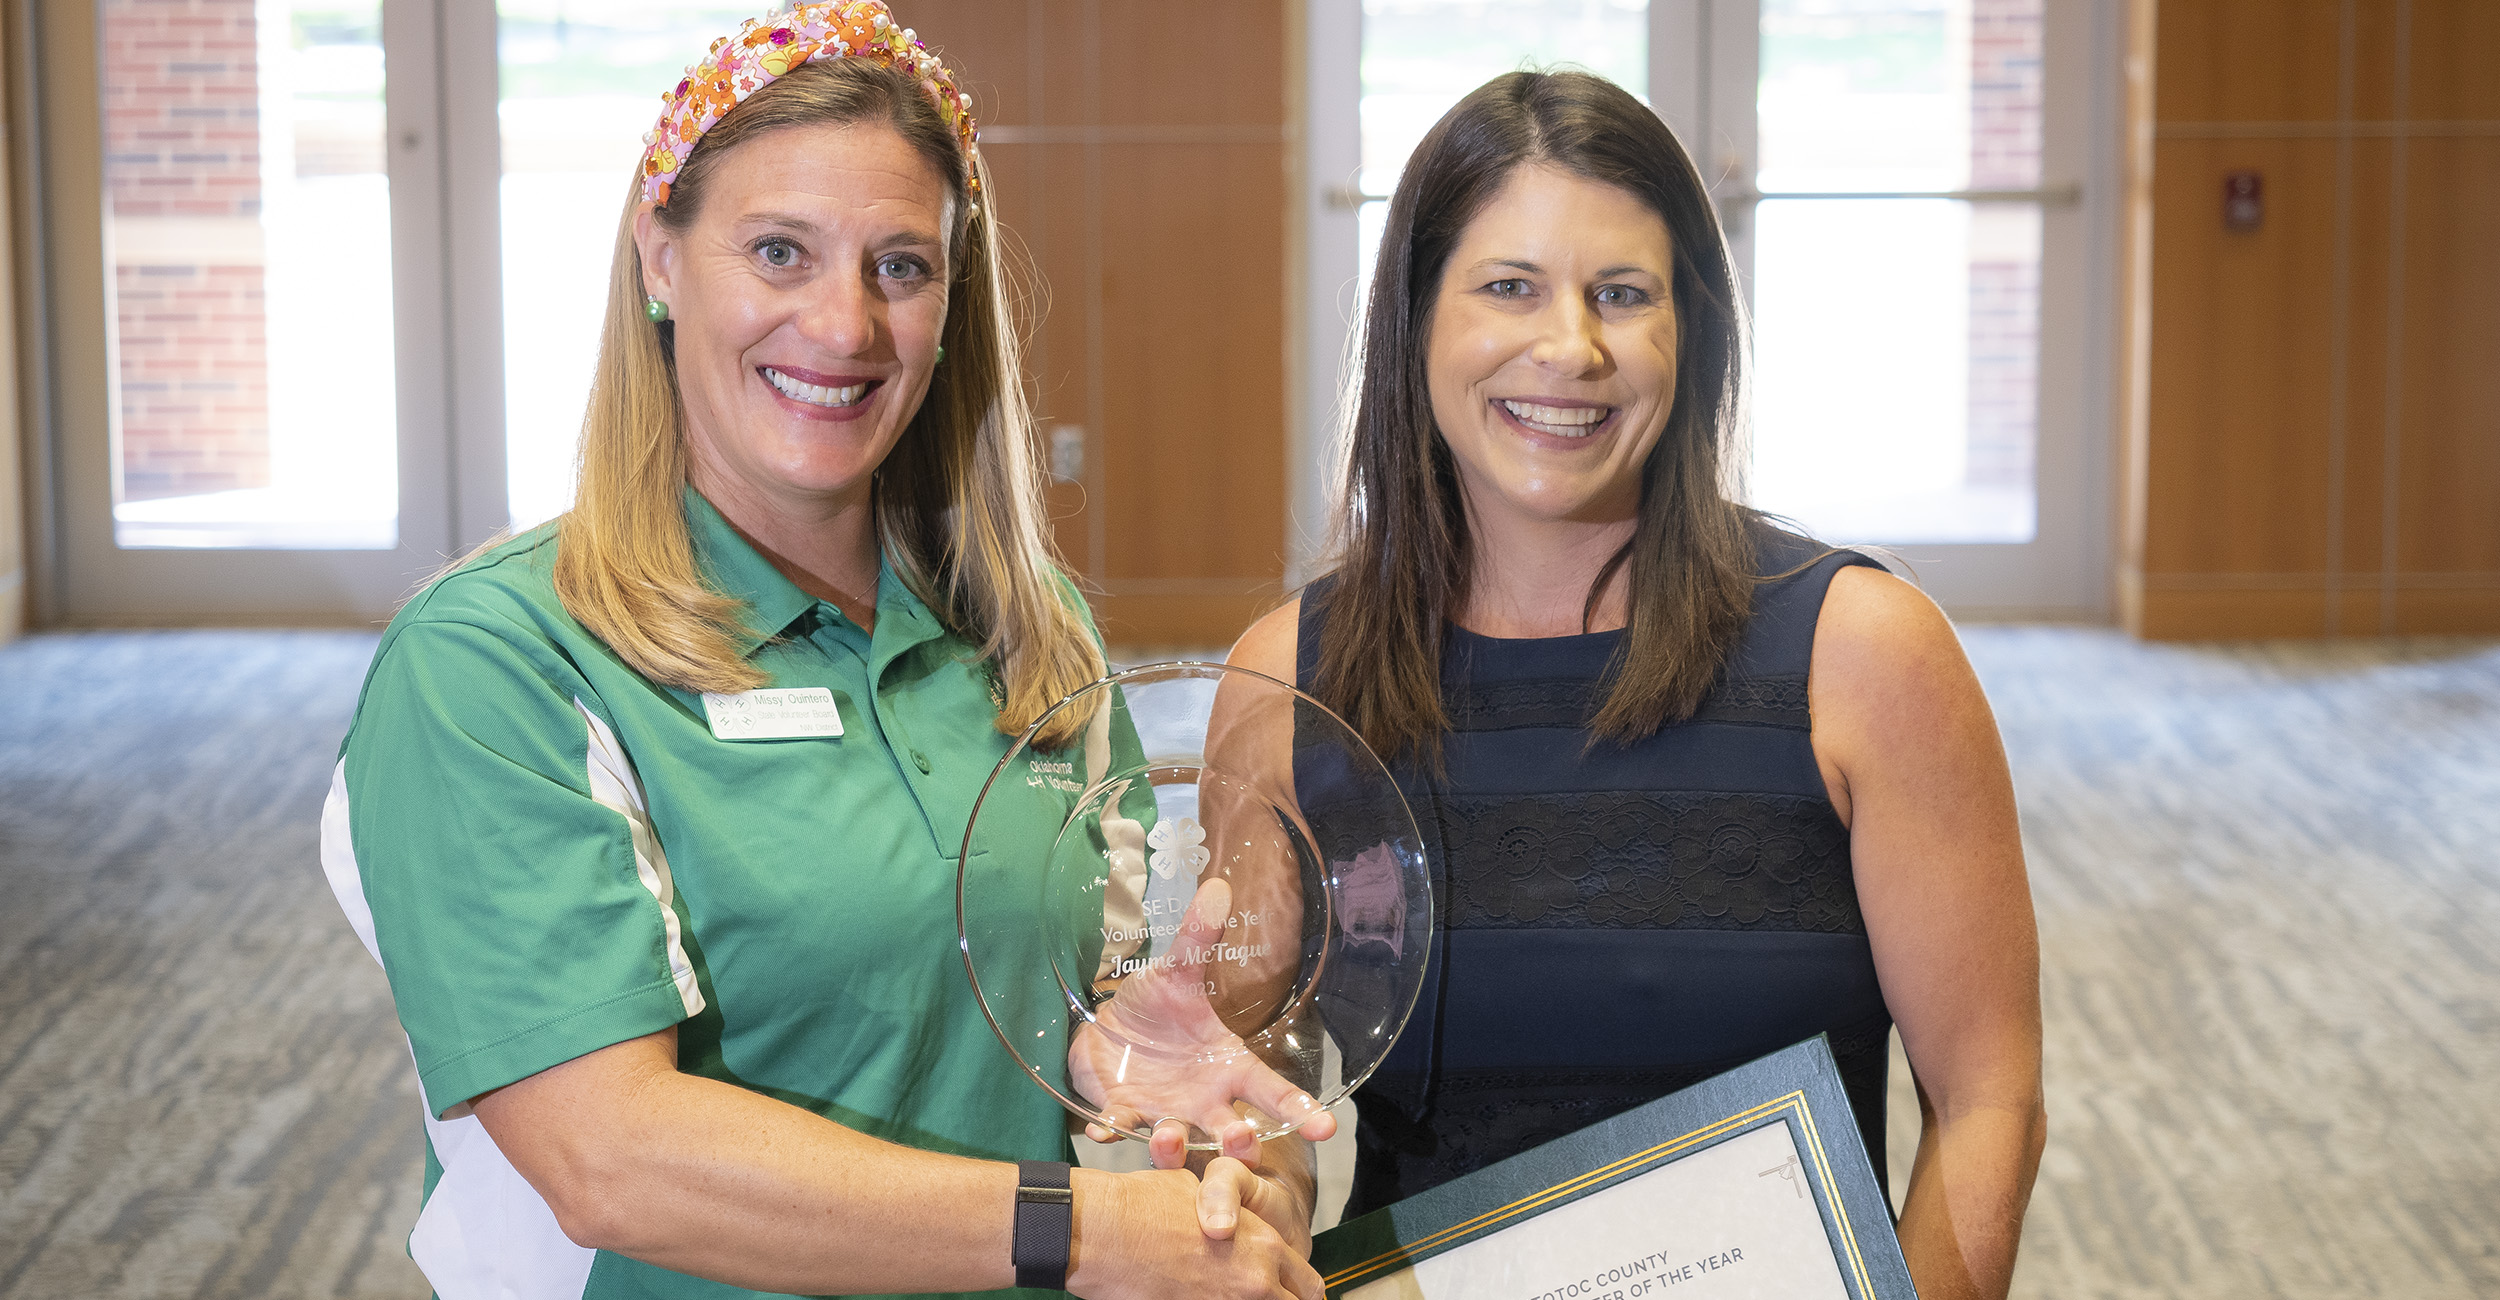 McTague Named State 4-H Volunteer of the Year